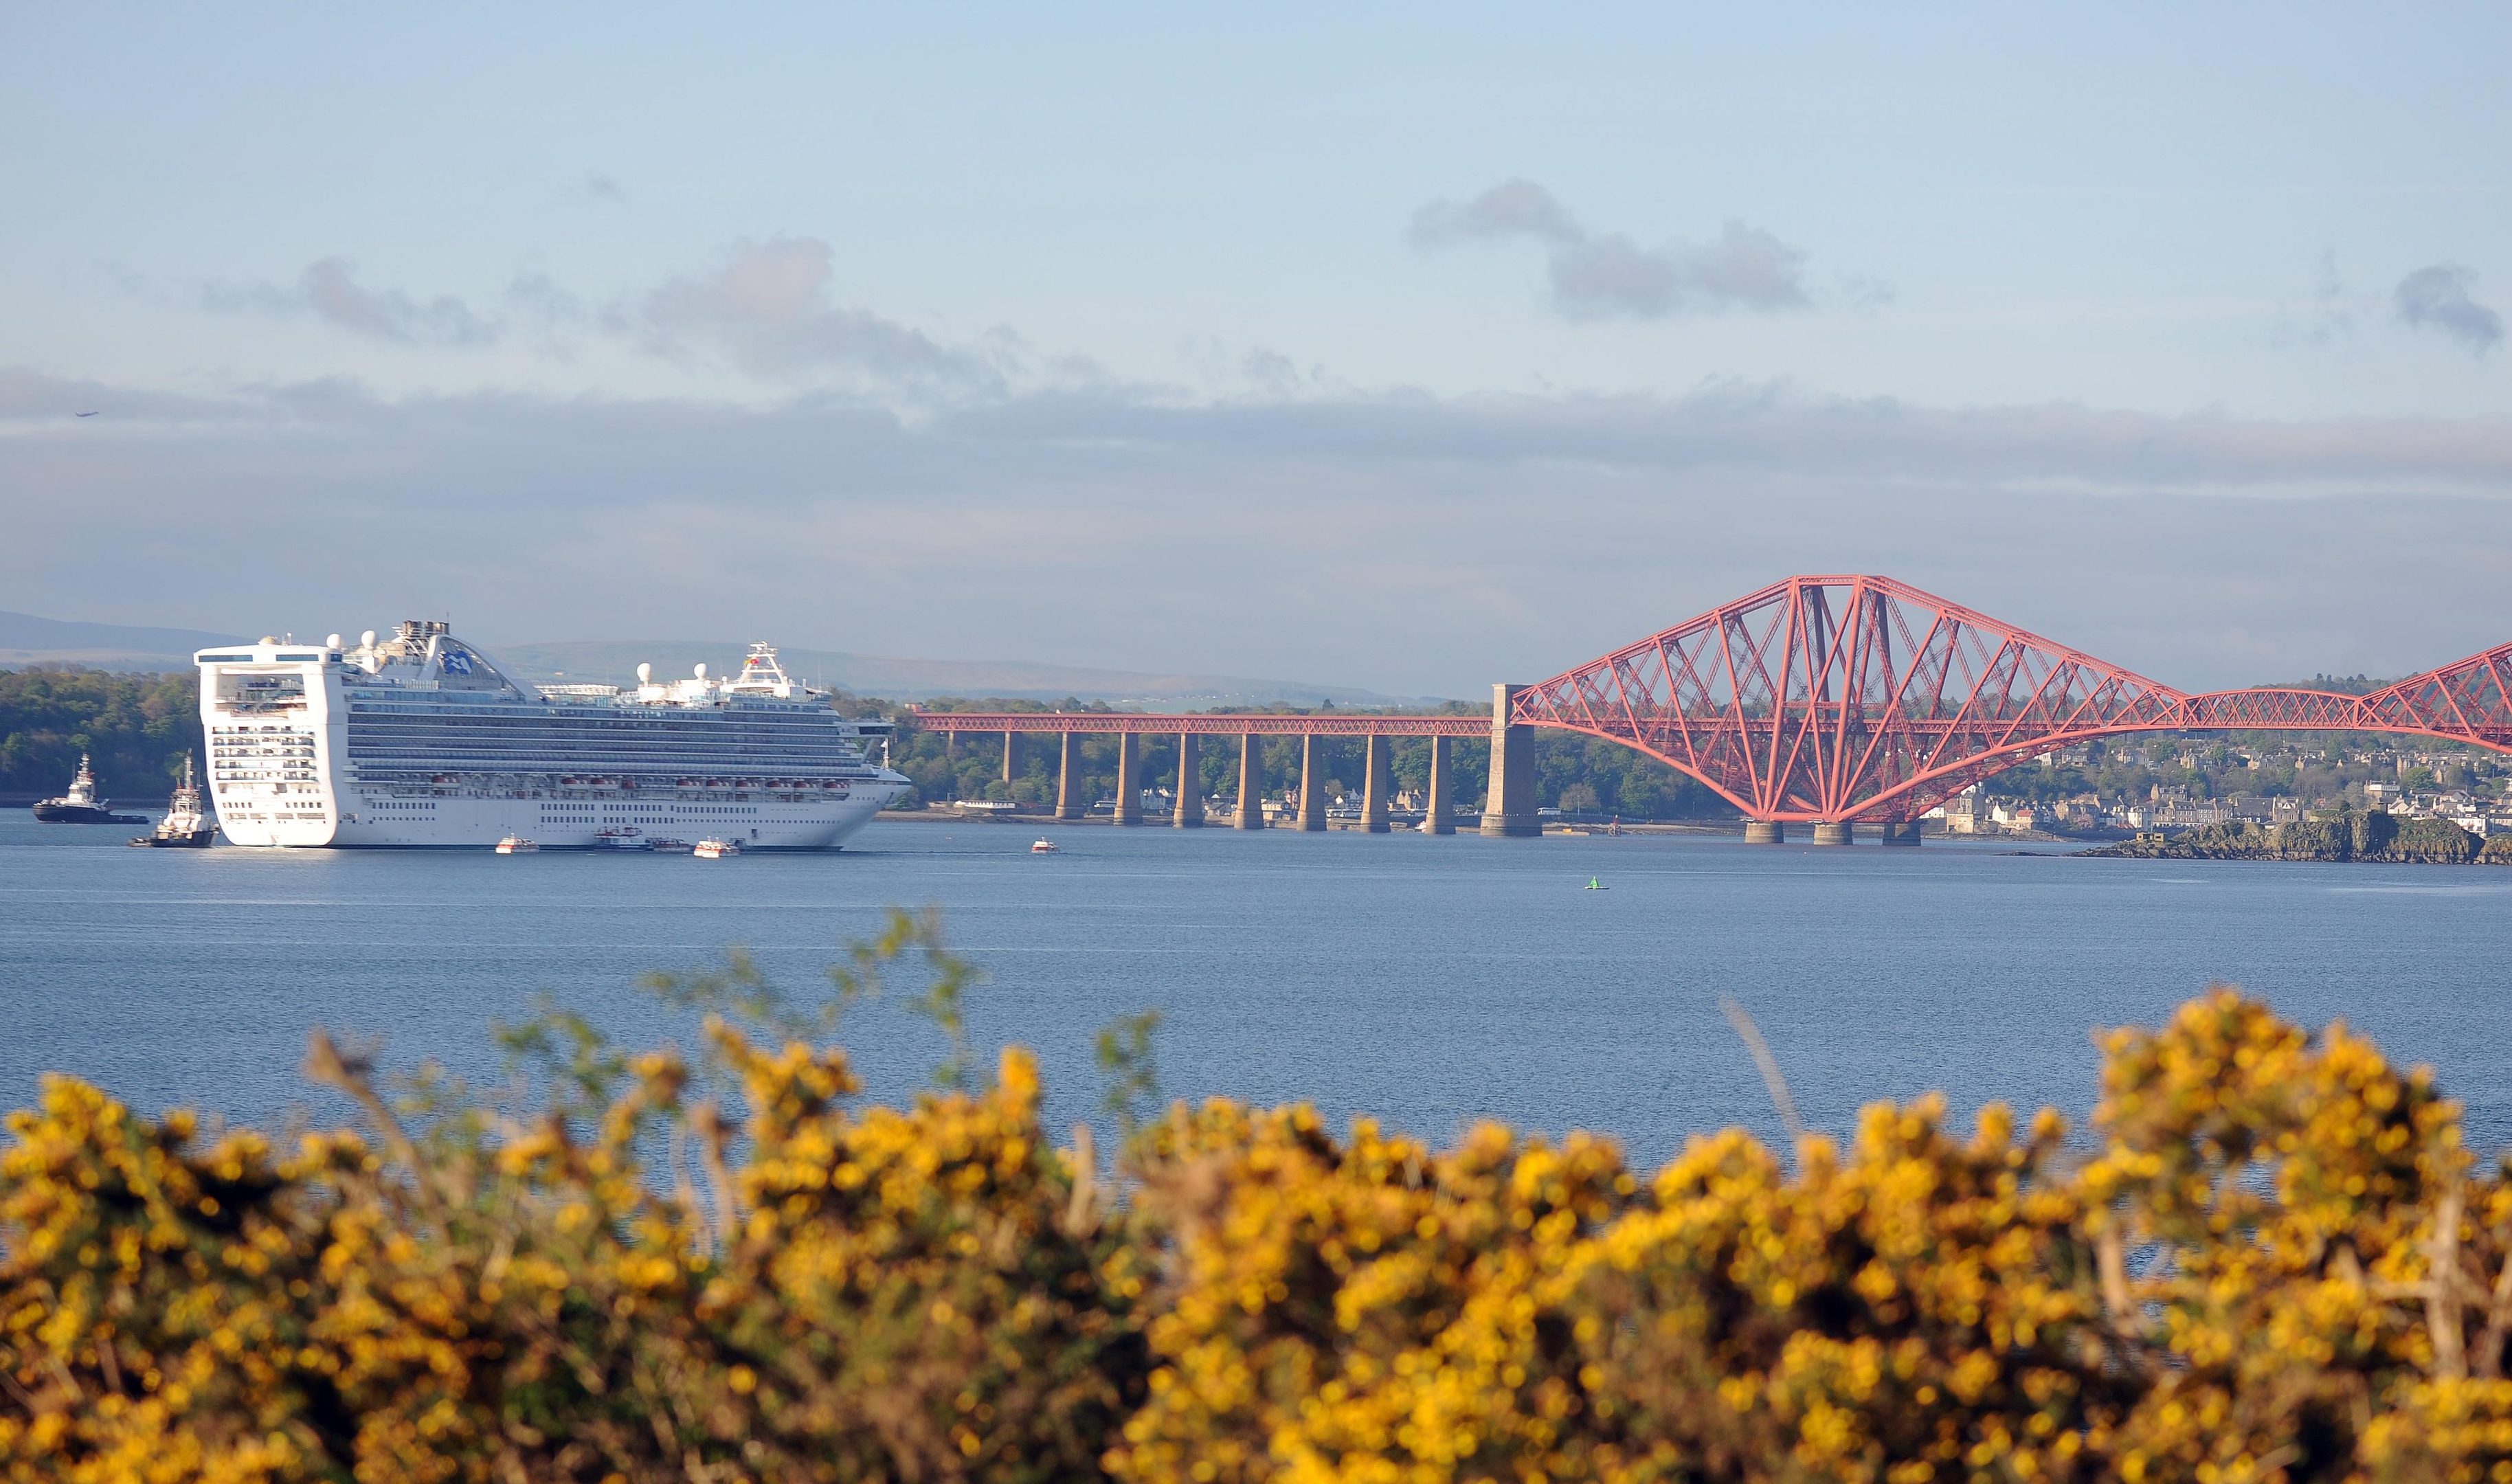 The sighting was made near in the Forth.